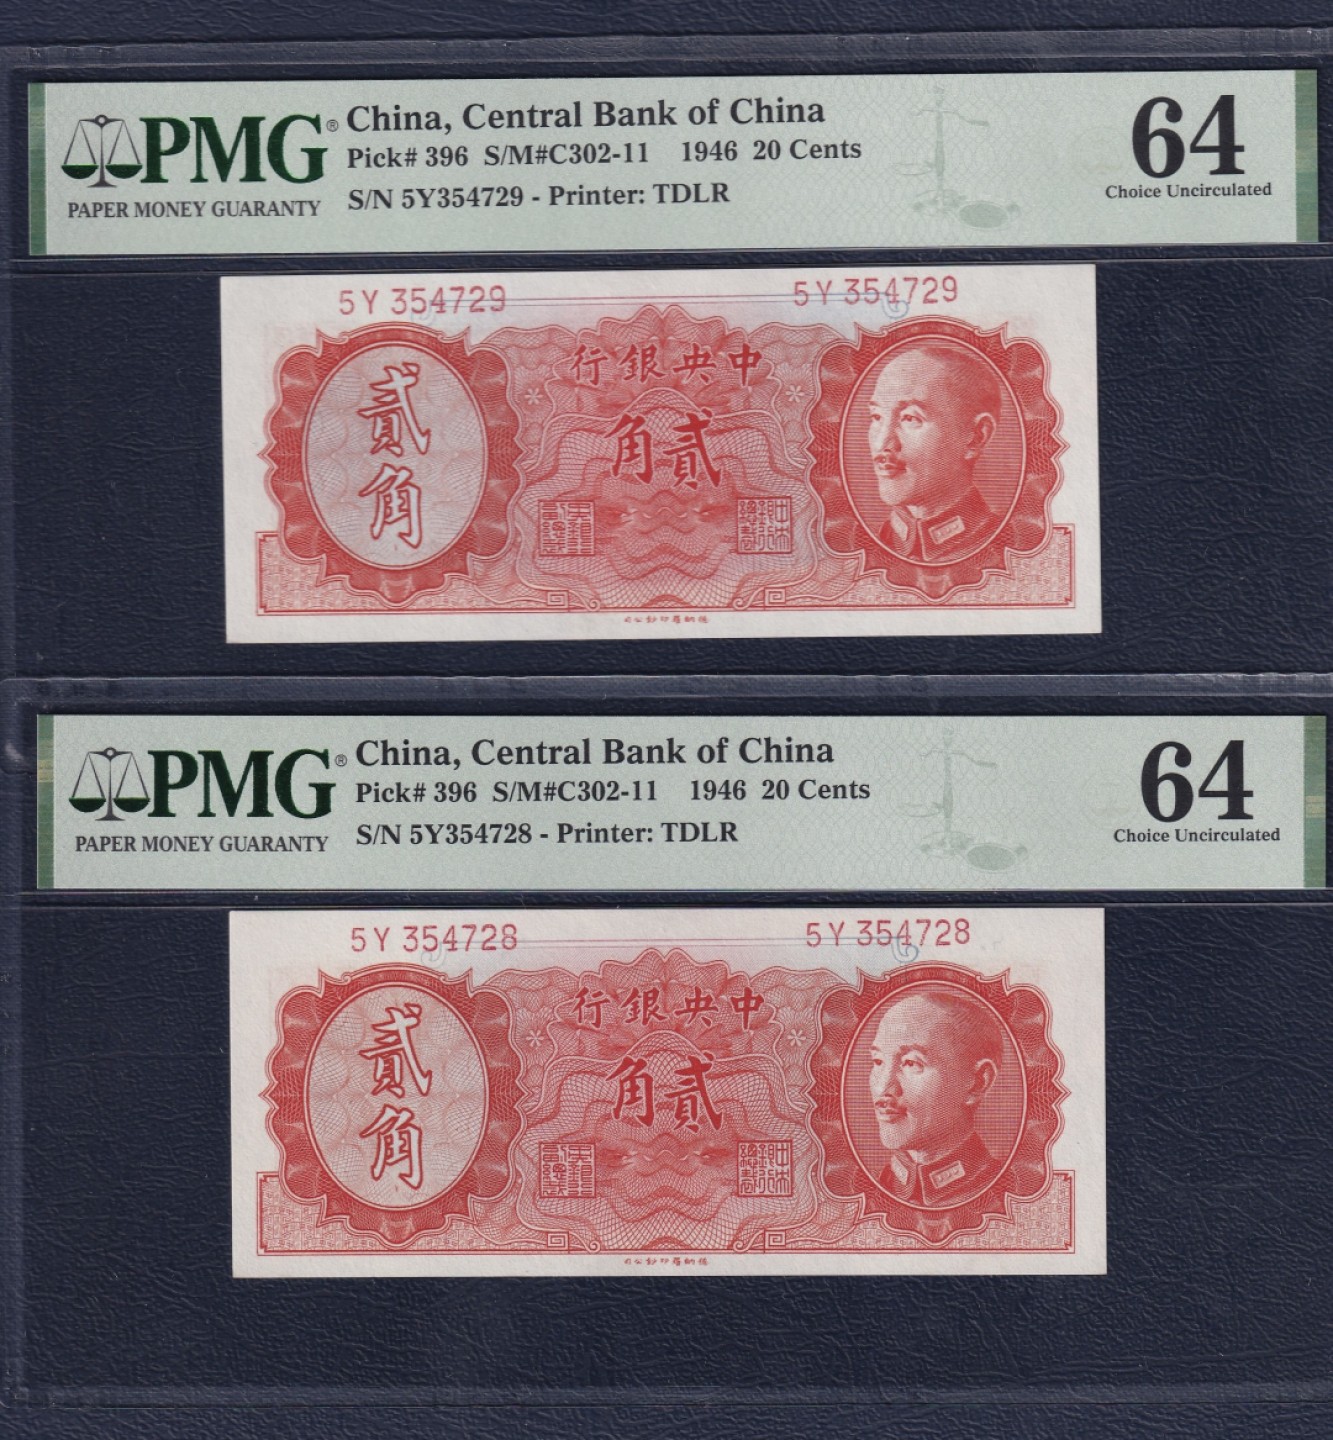 World Banknote Grading AUSTRIA《National Bank》1000 Schilling【1983】『PMG  Grading About Uncirculated 55 EPQ』 - 貨幣